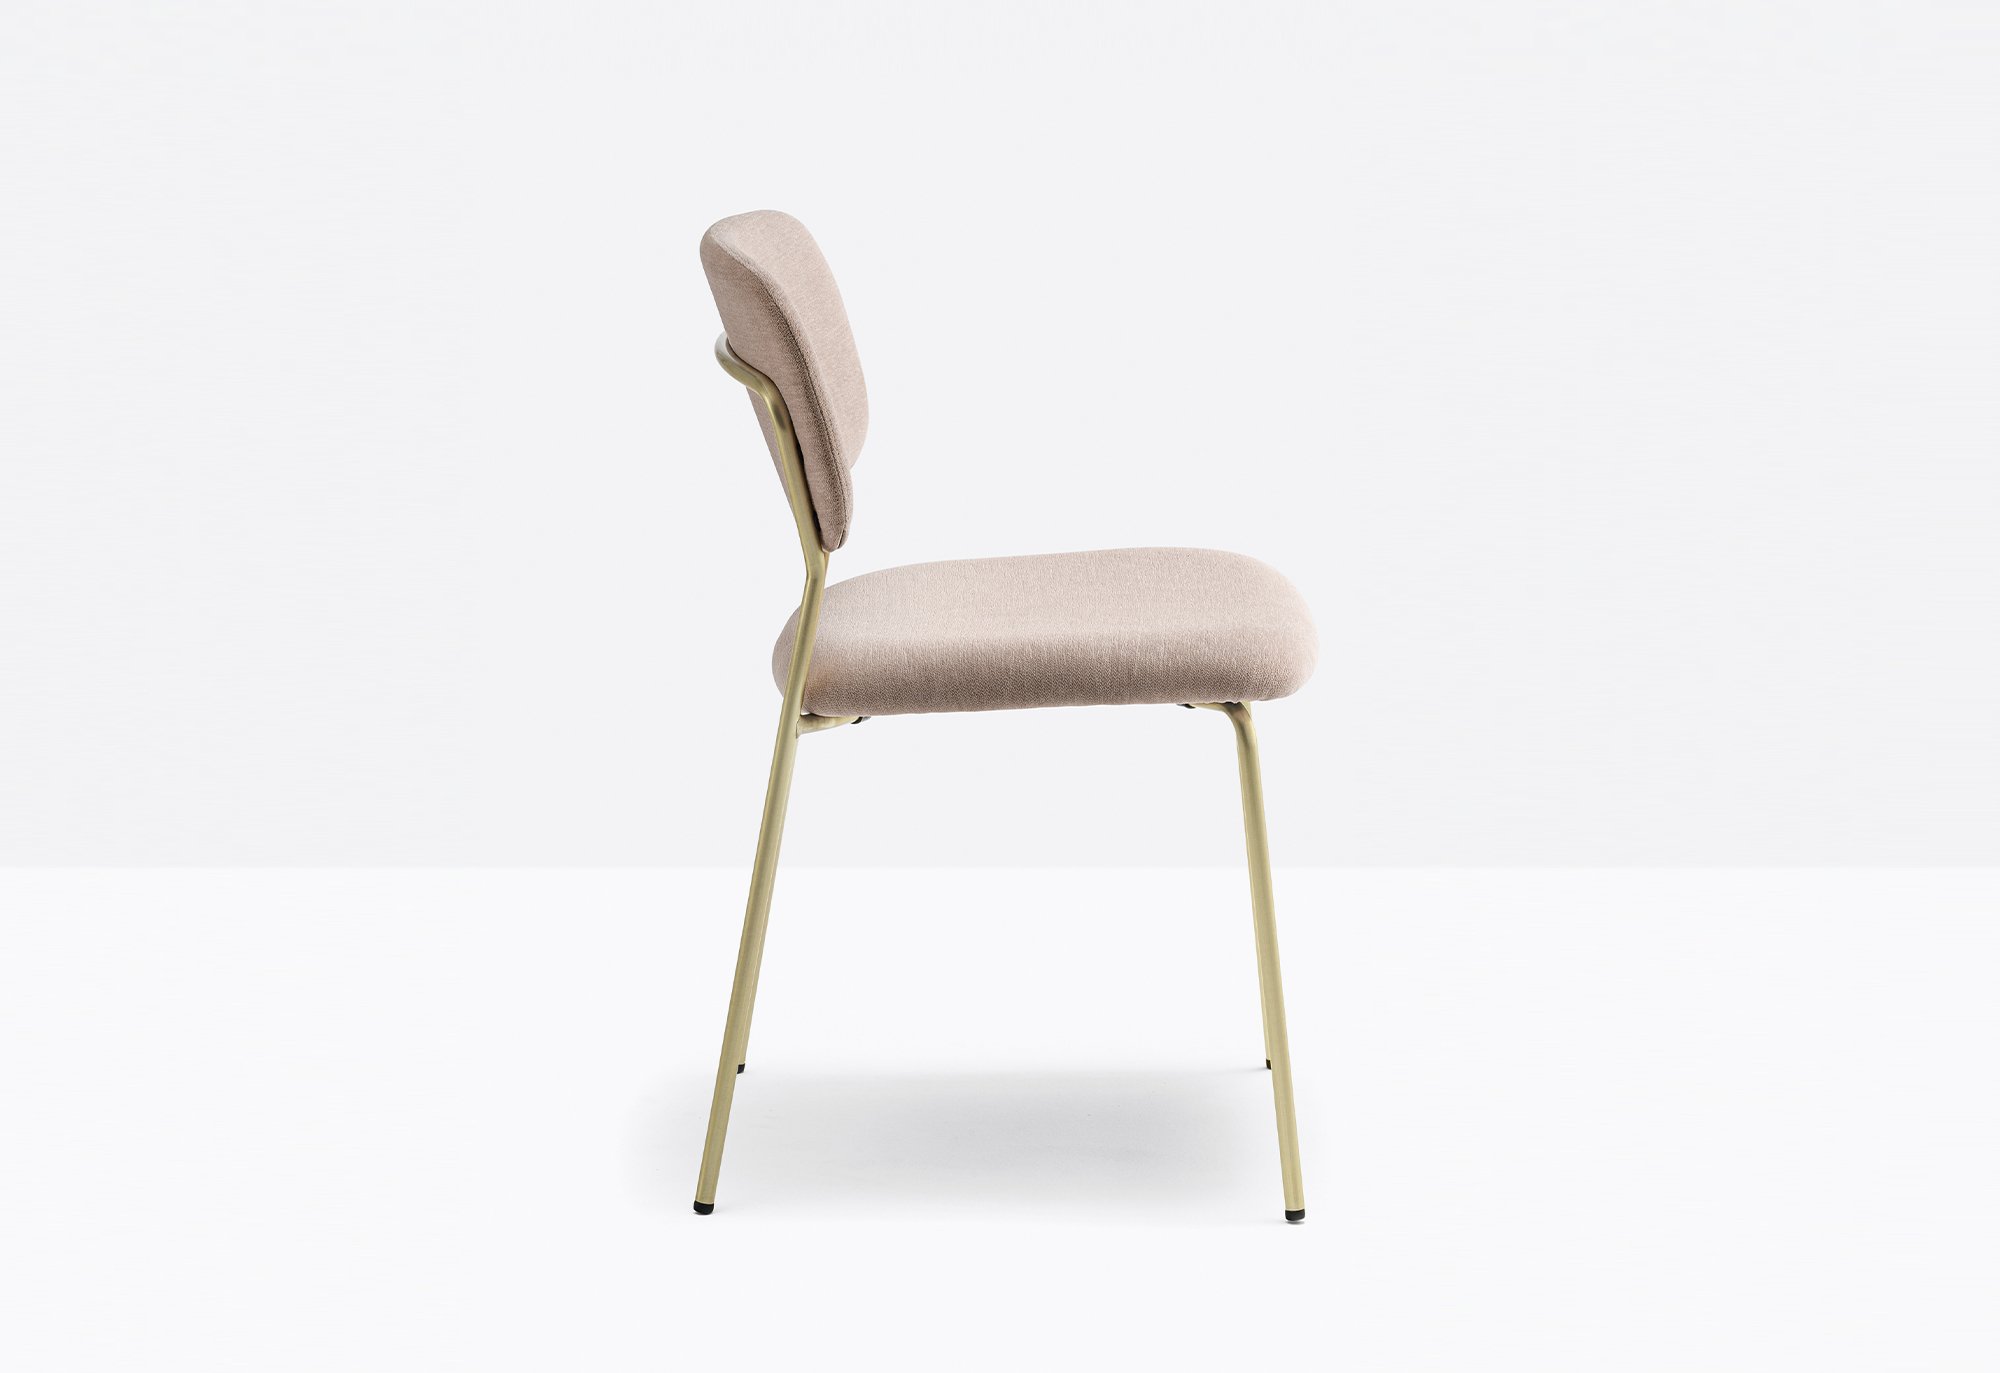 Jazz 3719 Chair from Pedrali, designed by Pedrali R&D